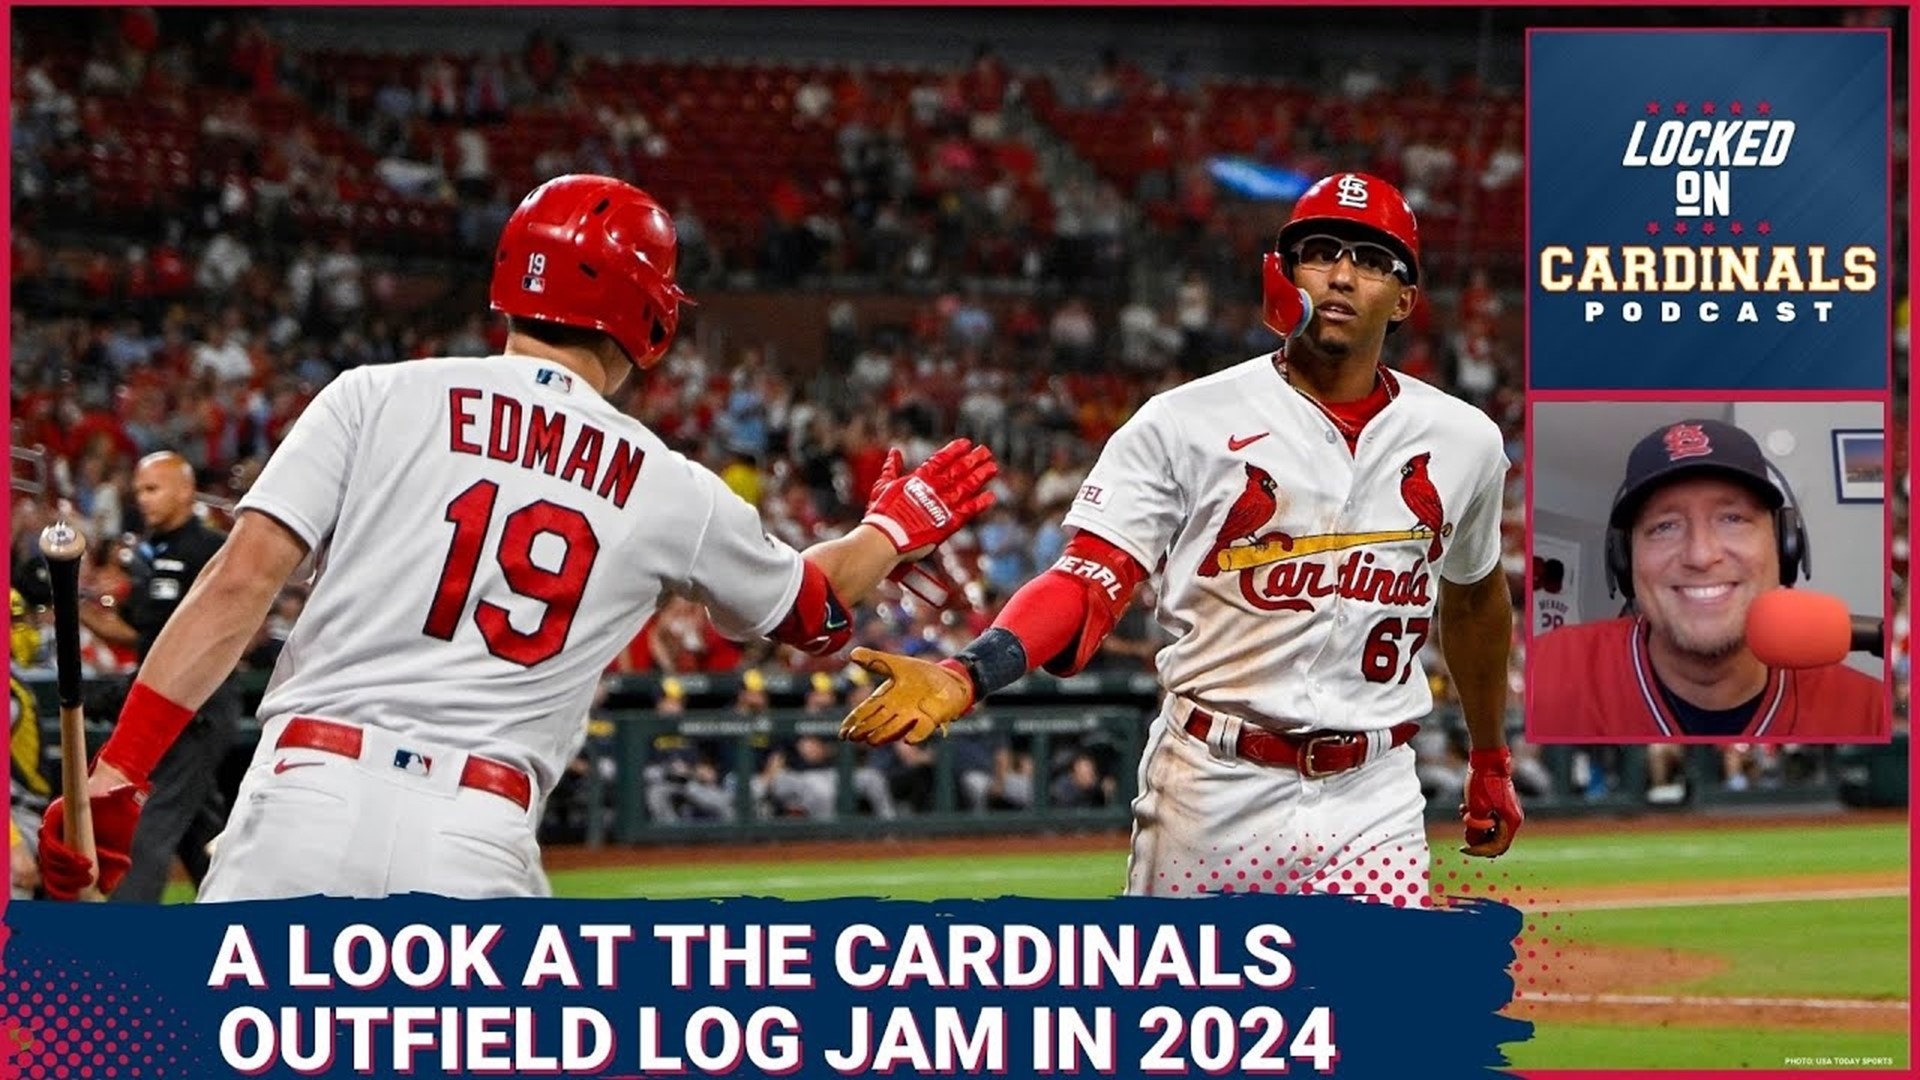 St. Louis Cardinals star player makes team's 2023 roster